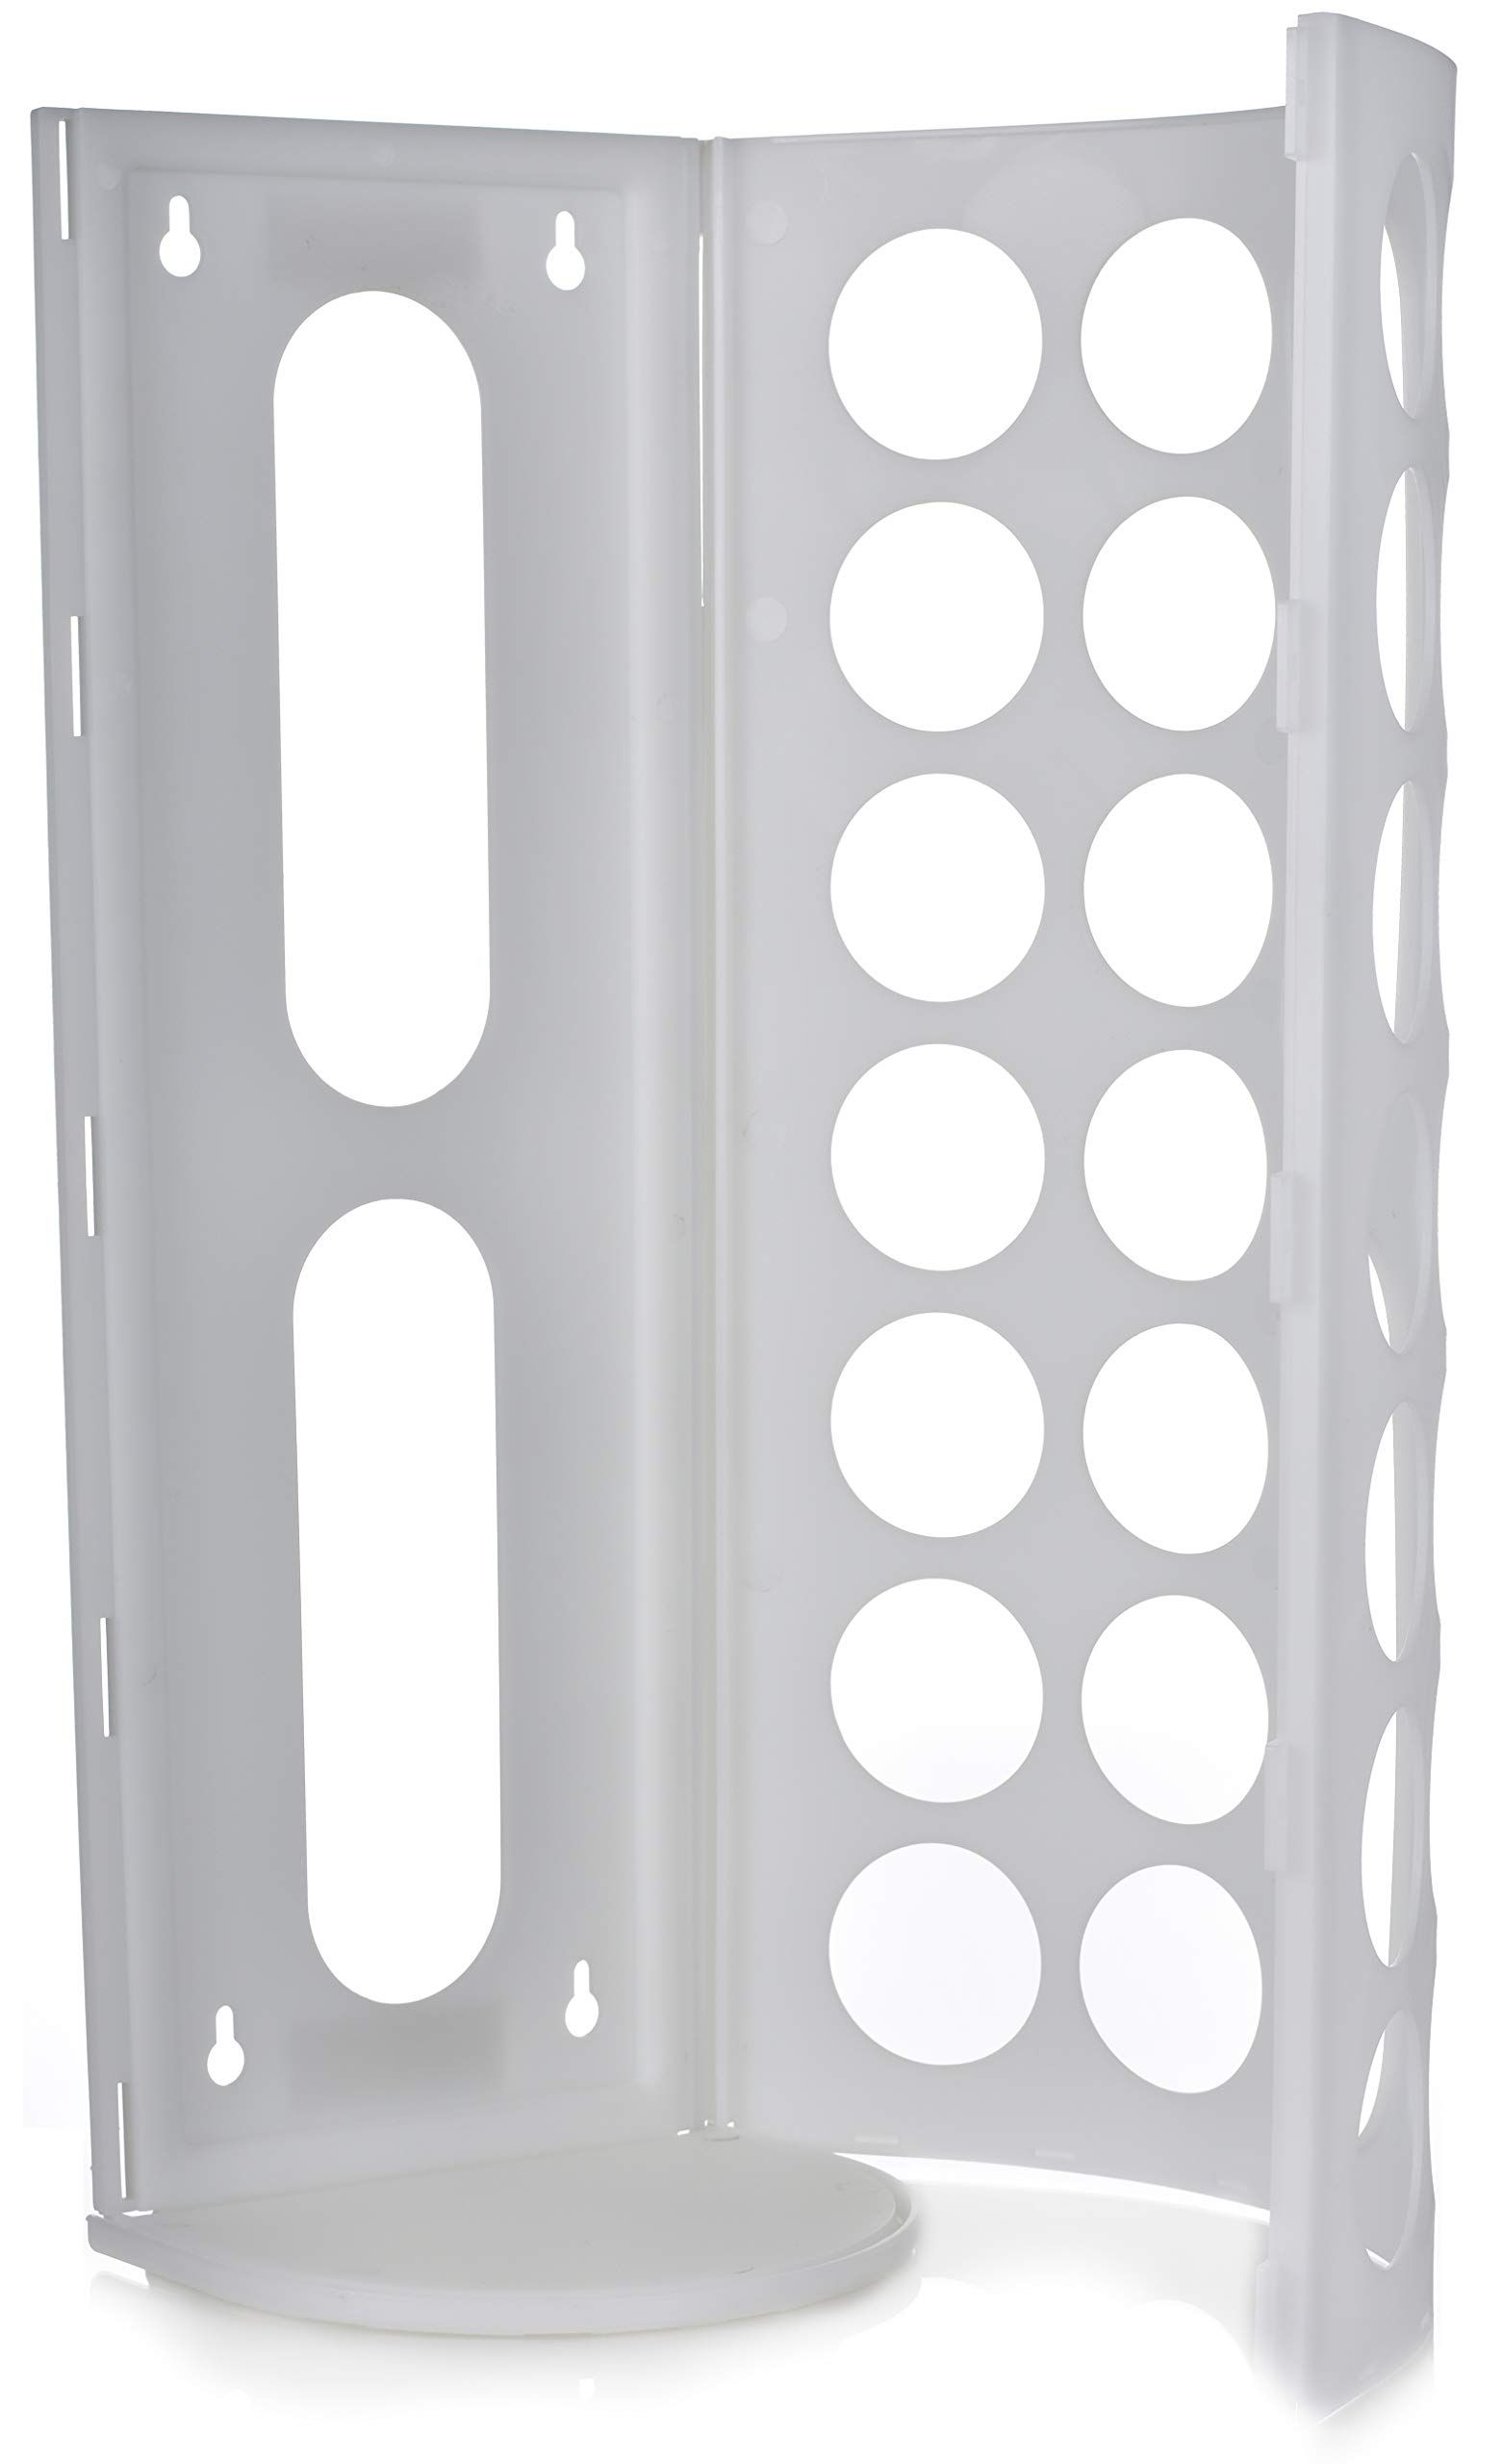 Grocery Bag Storage Holder - This Large Capacity Bag Dispenser Will Neatly Store Plastic Shopping... | Amazon (US)